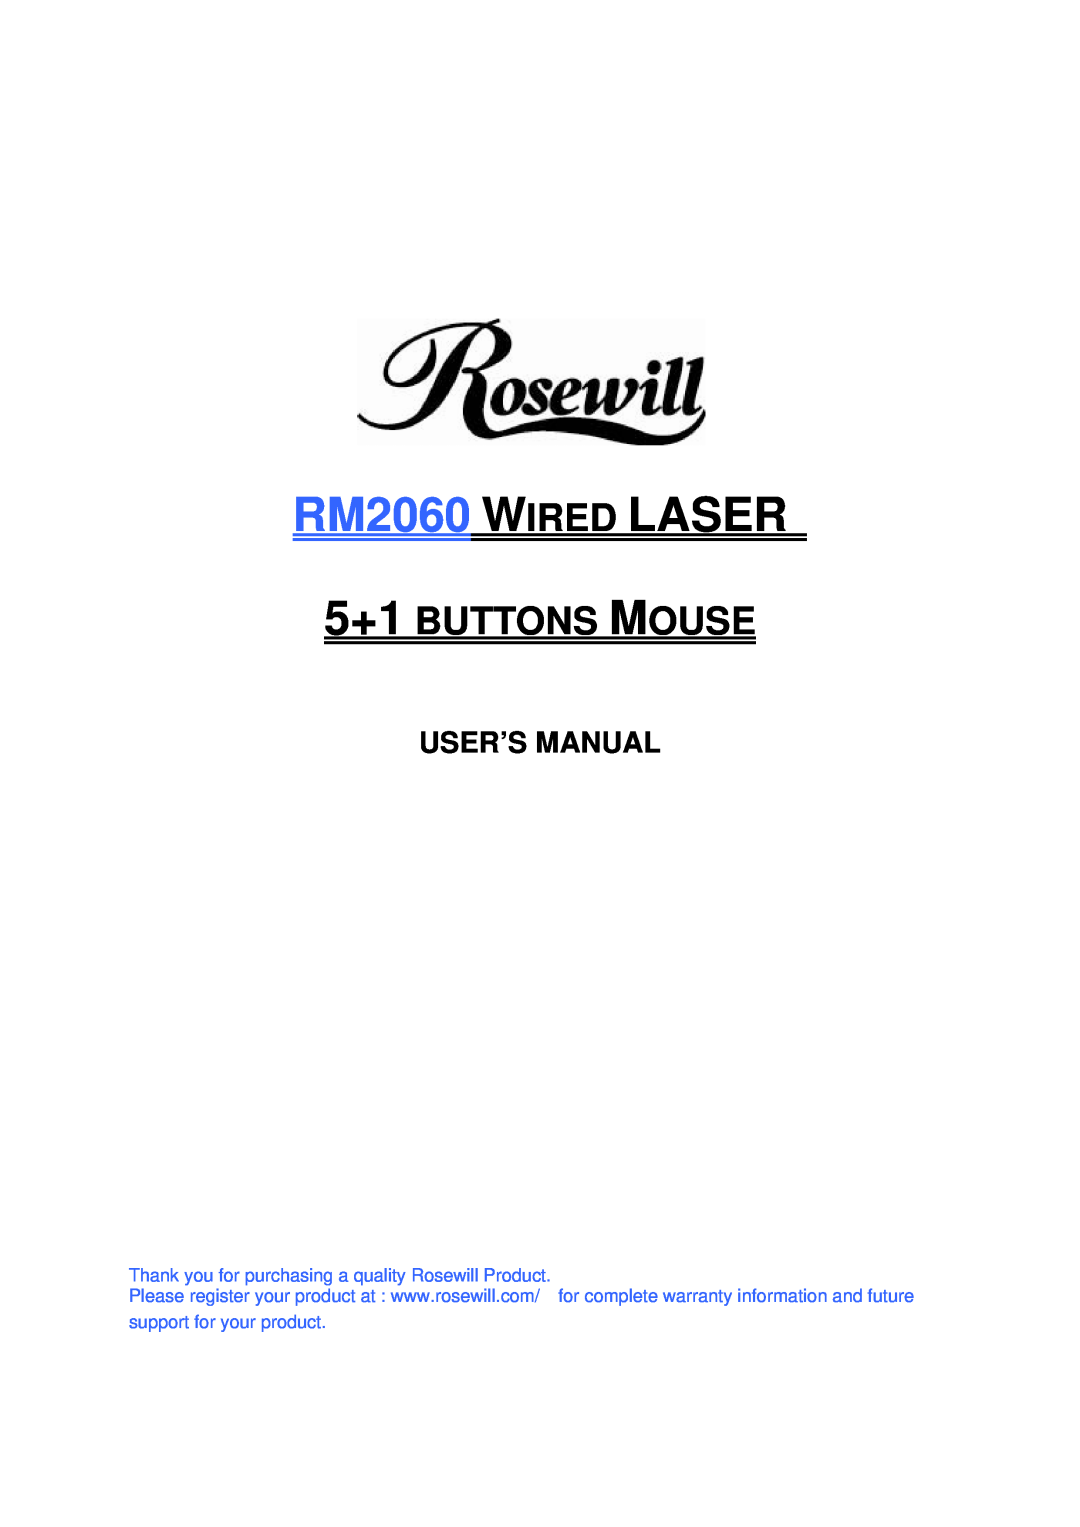 Rosewill user manual User’S Manual, RM2060 WIRED LASER, 5+1 BUTTONS MOUSE 